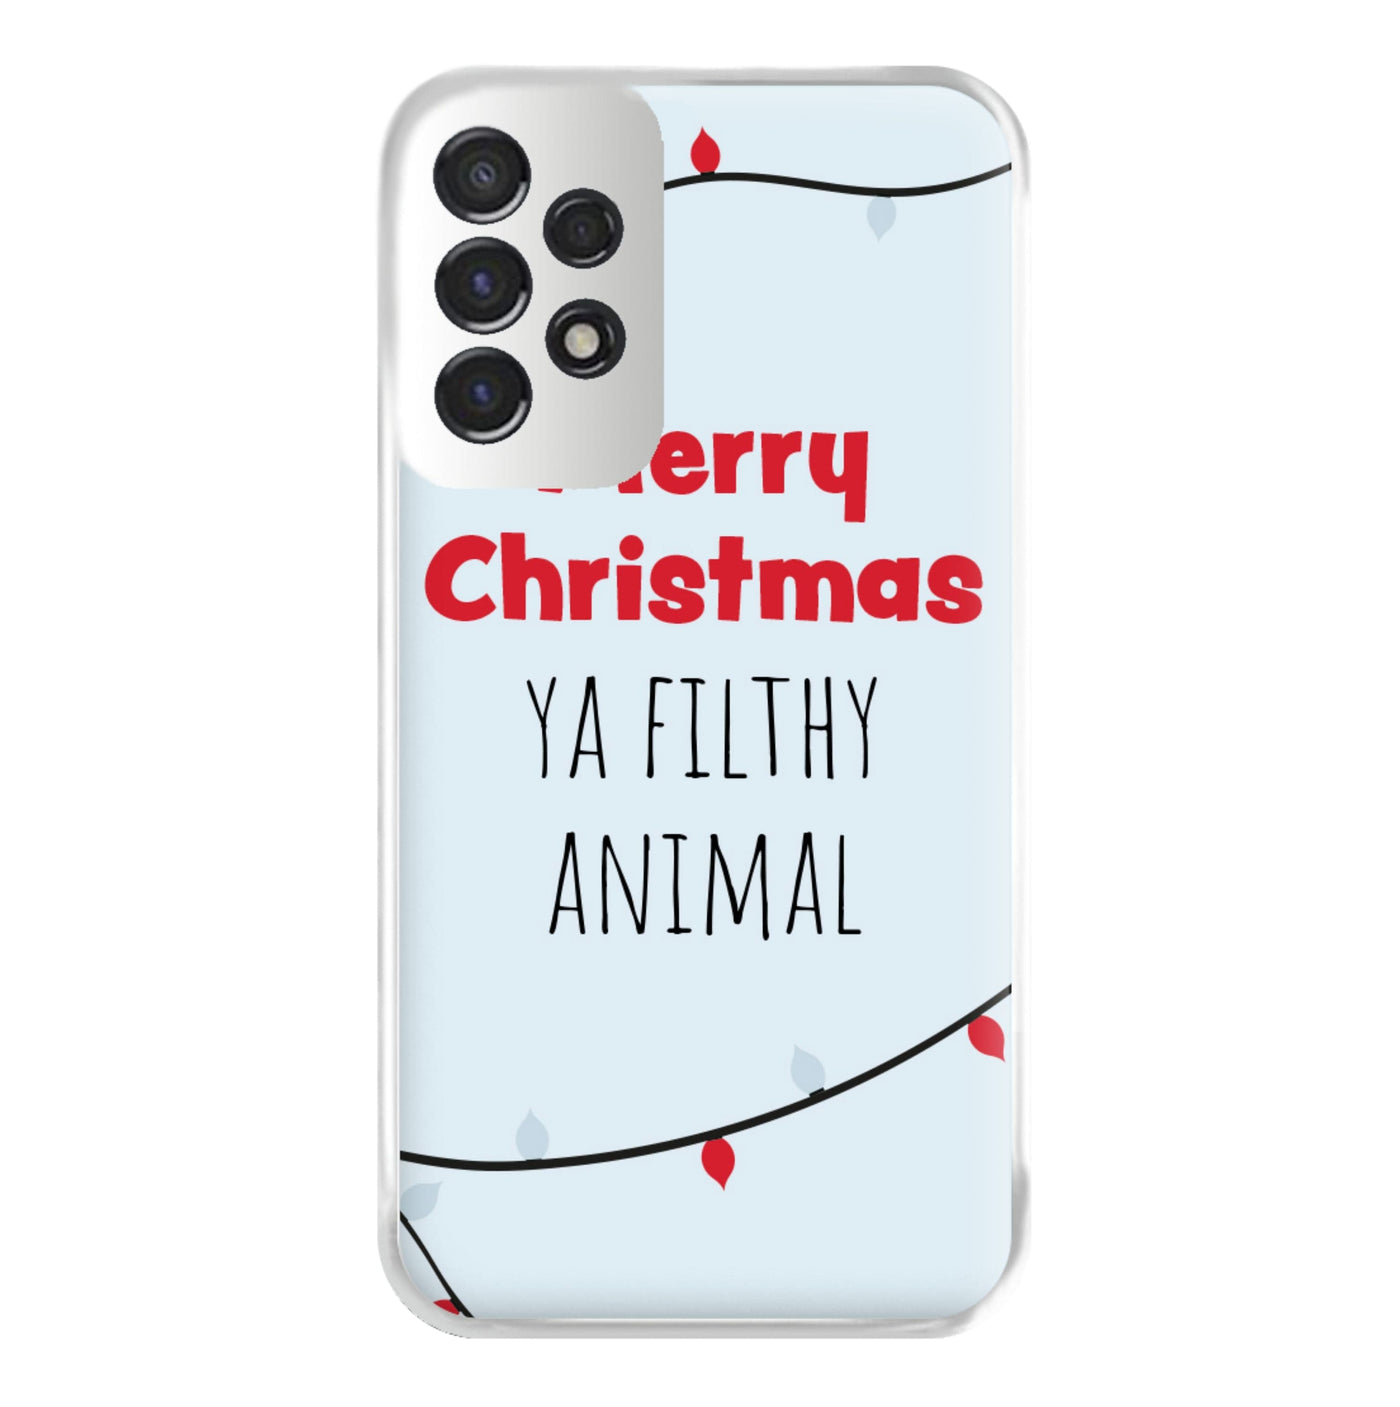 Merry Christmas Ya Filthy Animal - Home Alone Phone Case